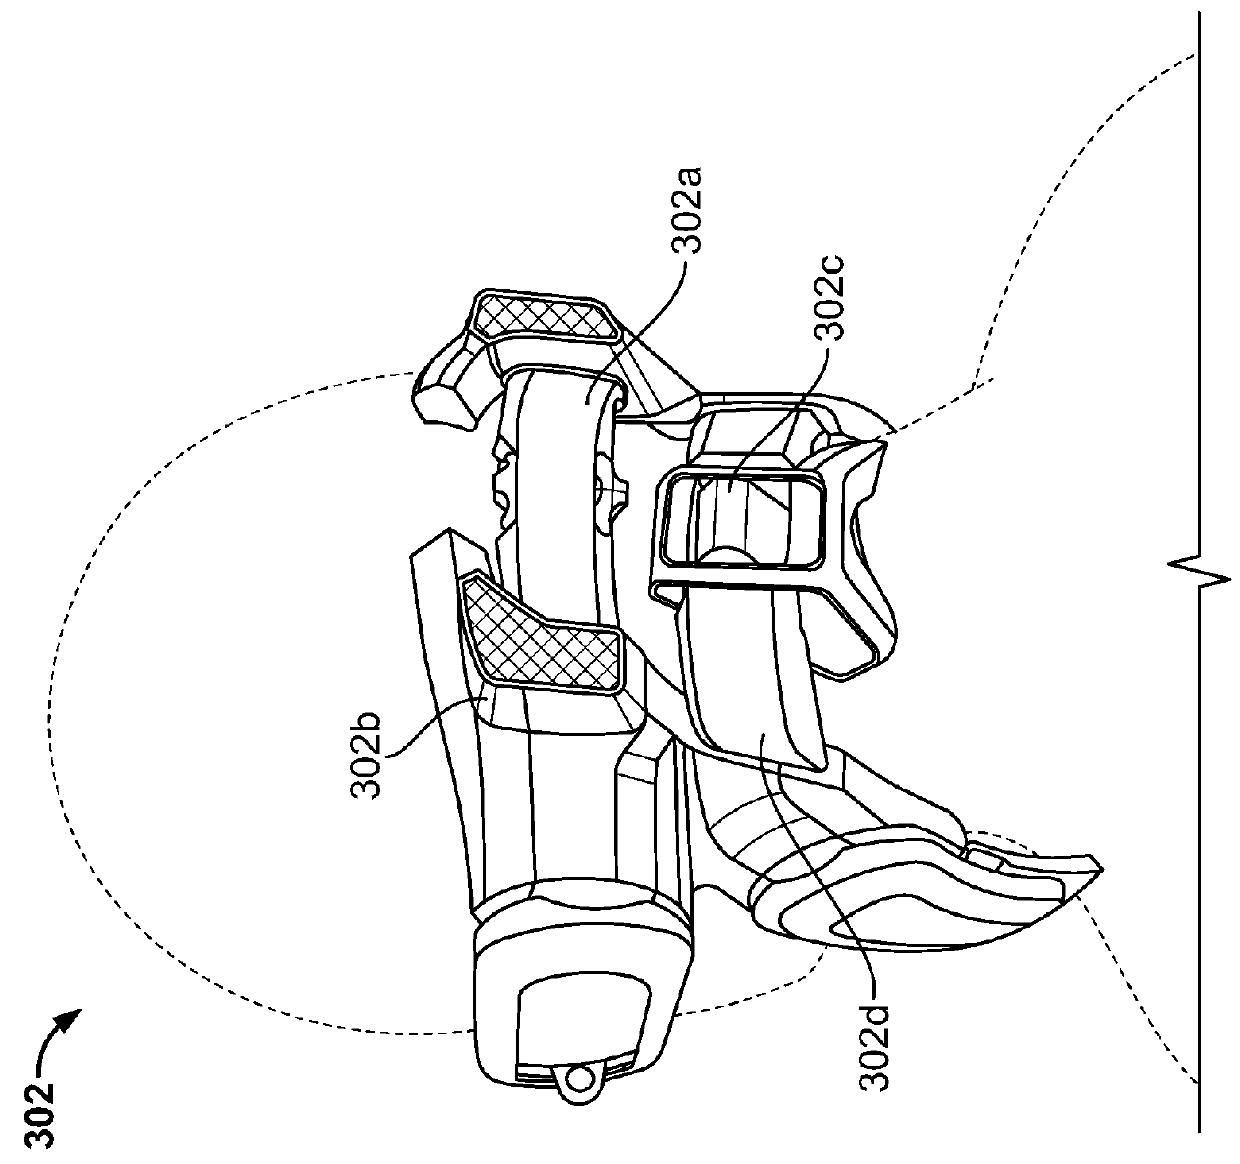 Helmet Apparatus and System with Carotid Collar Means On-Boarded